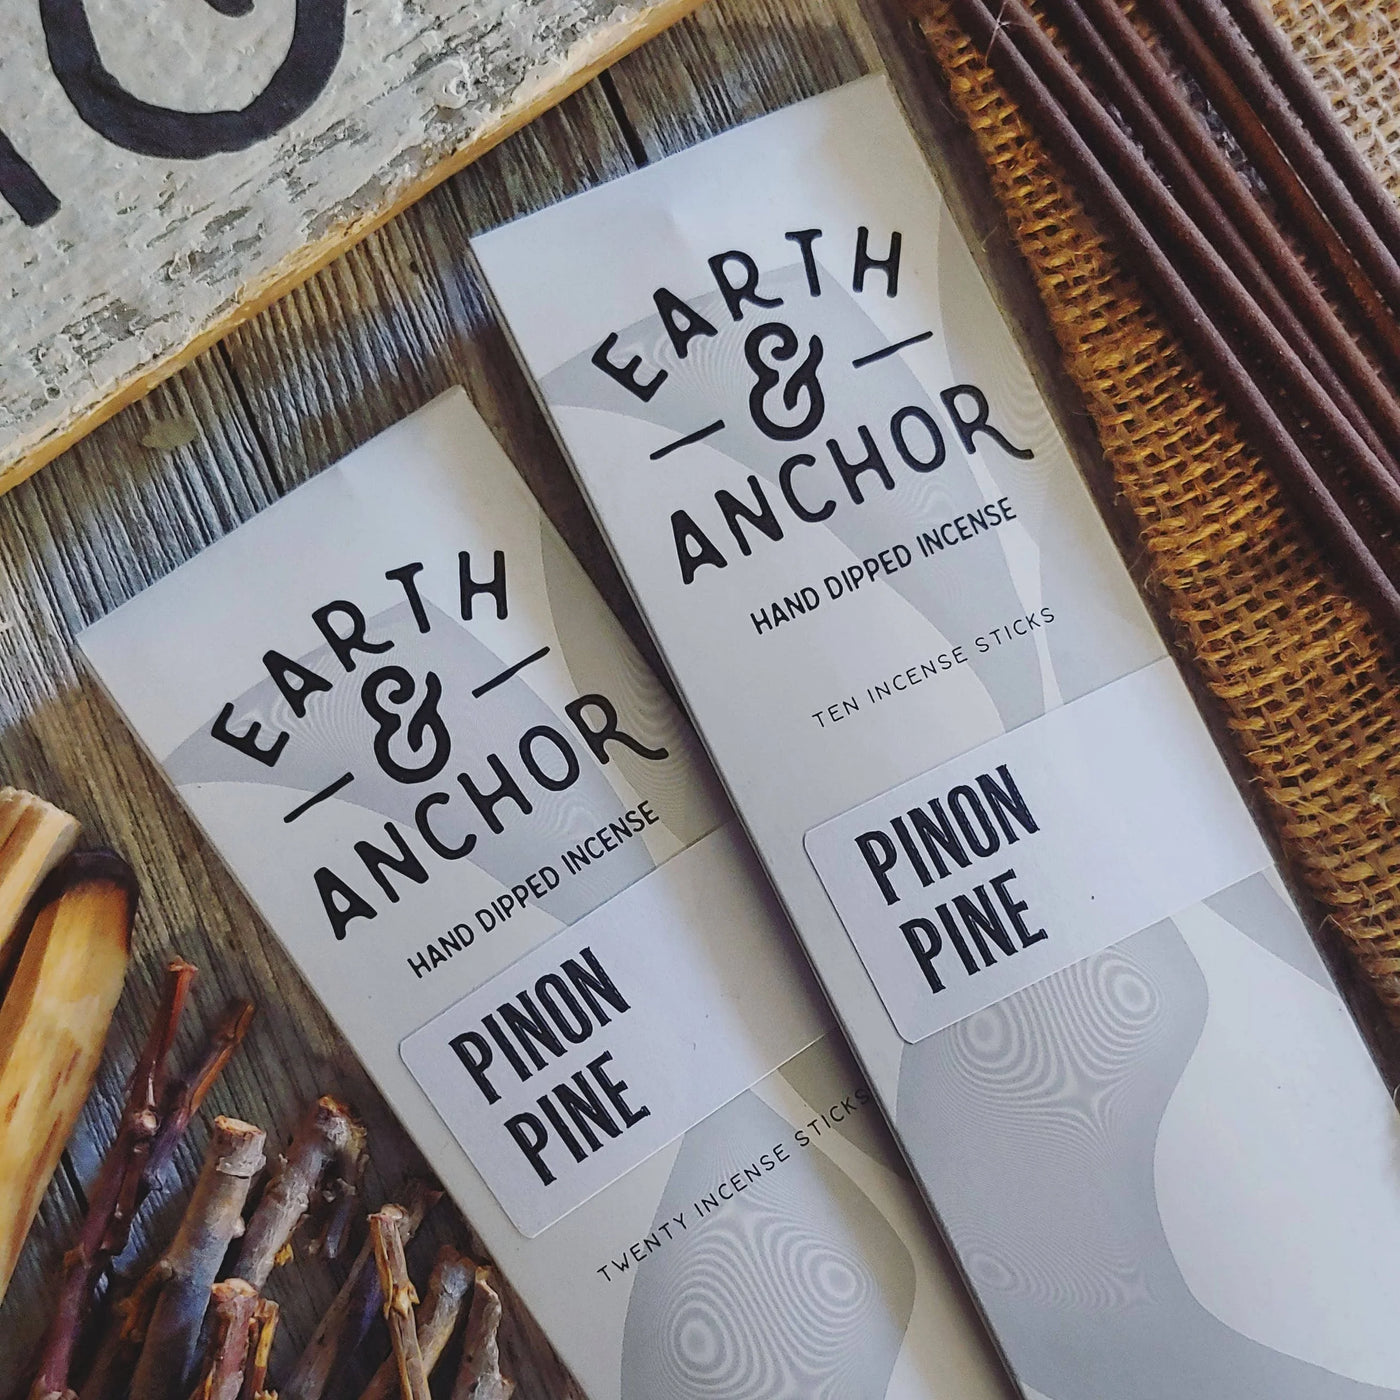 Earth and Anchor - Incense